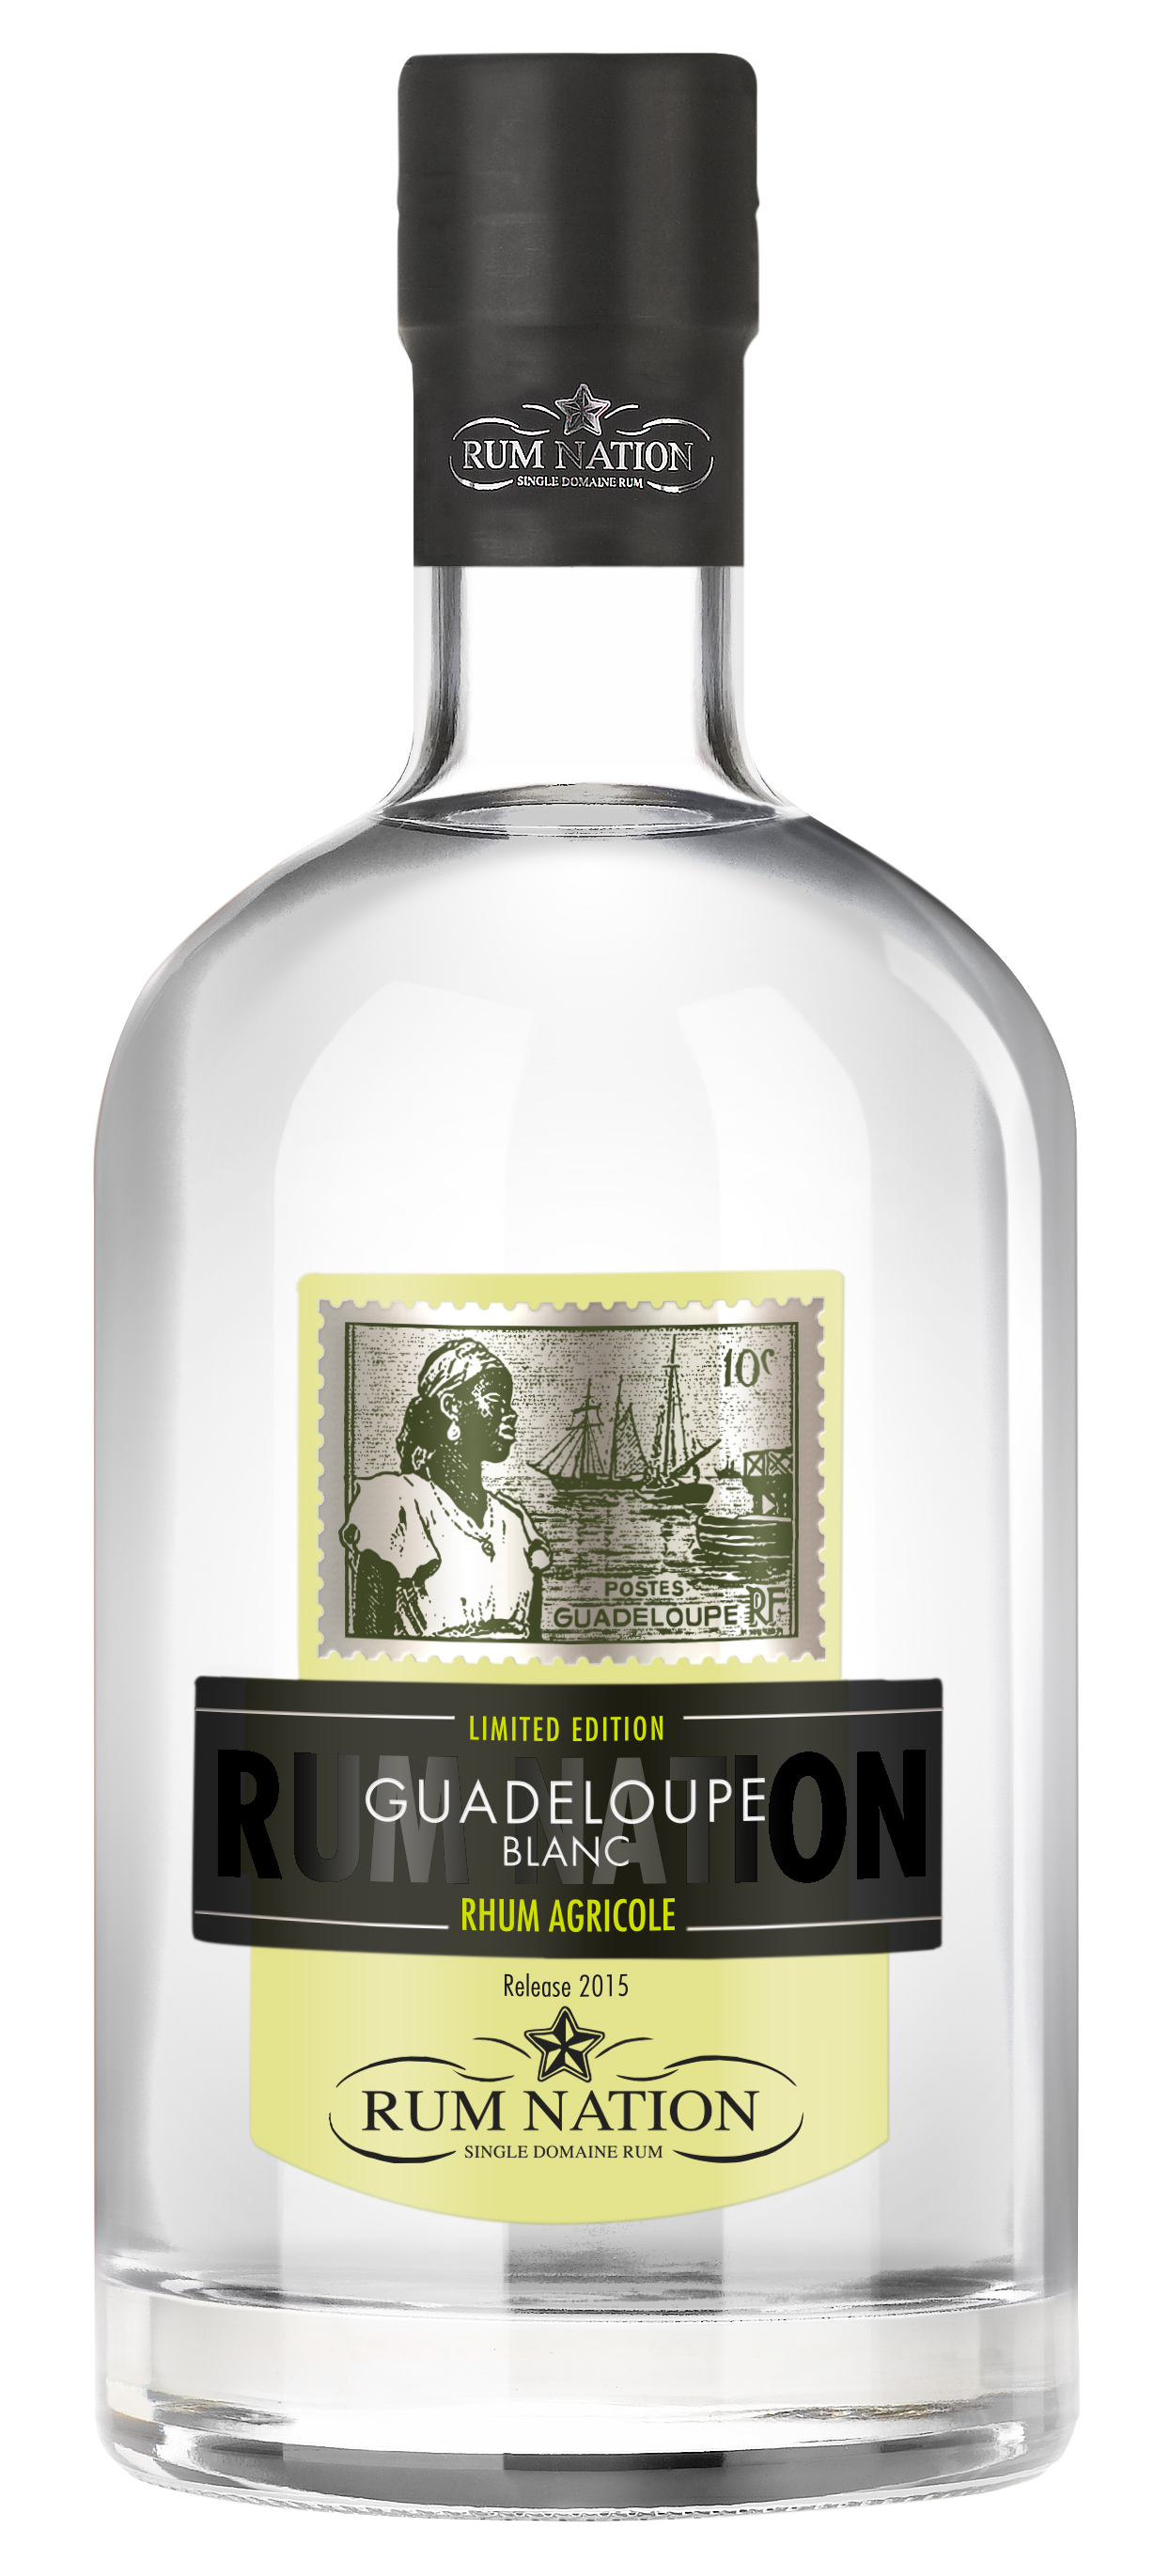 Rum Nation Guadeloupe Blanc, 50% Vol. 0,7 ltr.